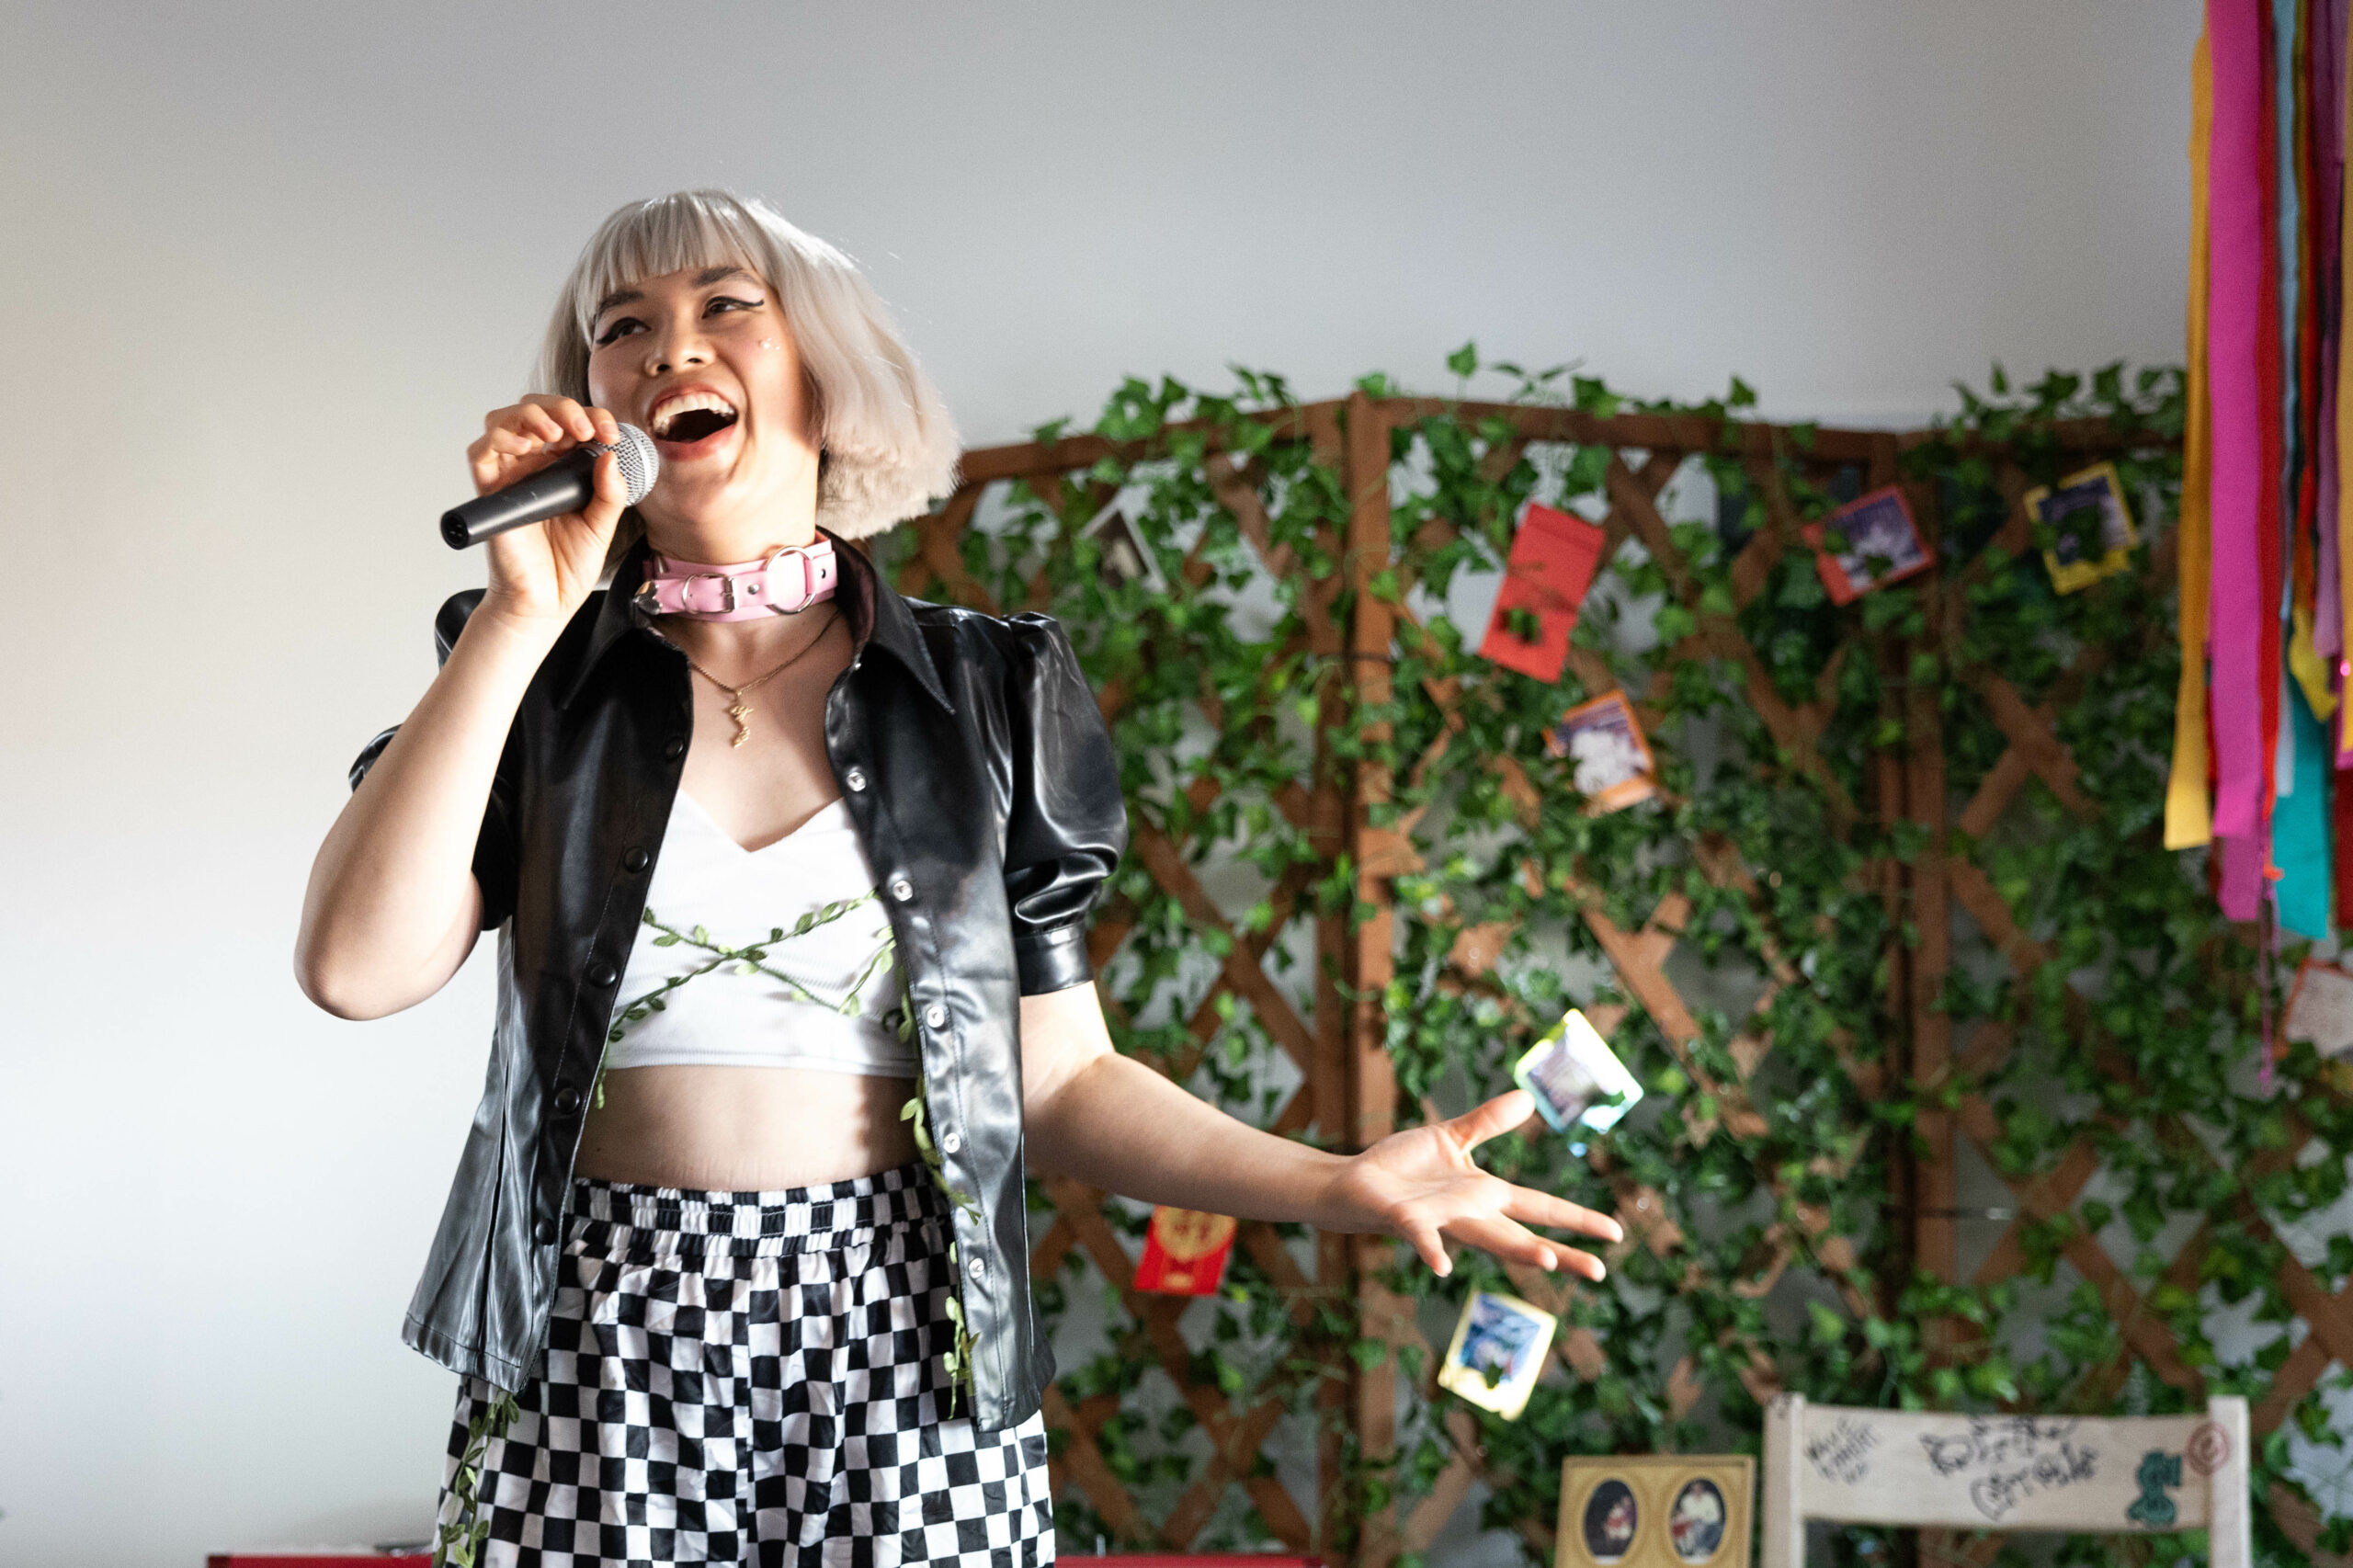 Promqueen smiles and sings into a microphone in front of a colorful backdrop. She wears a pink choker, black and white checkered pants and a black leather puff-sleeved jacket over a white top with green vine wrapped around her body.